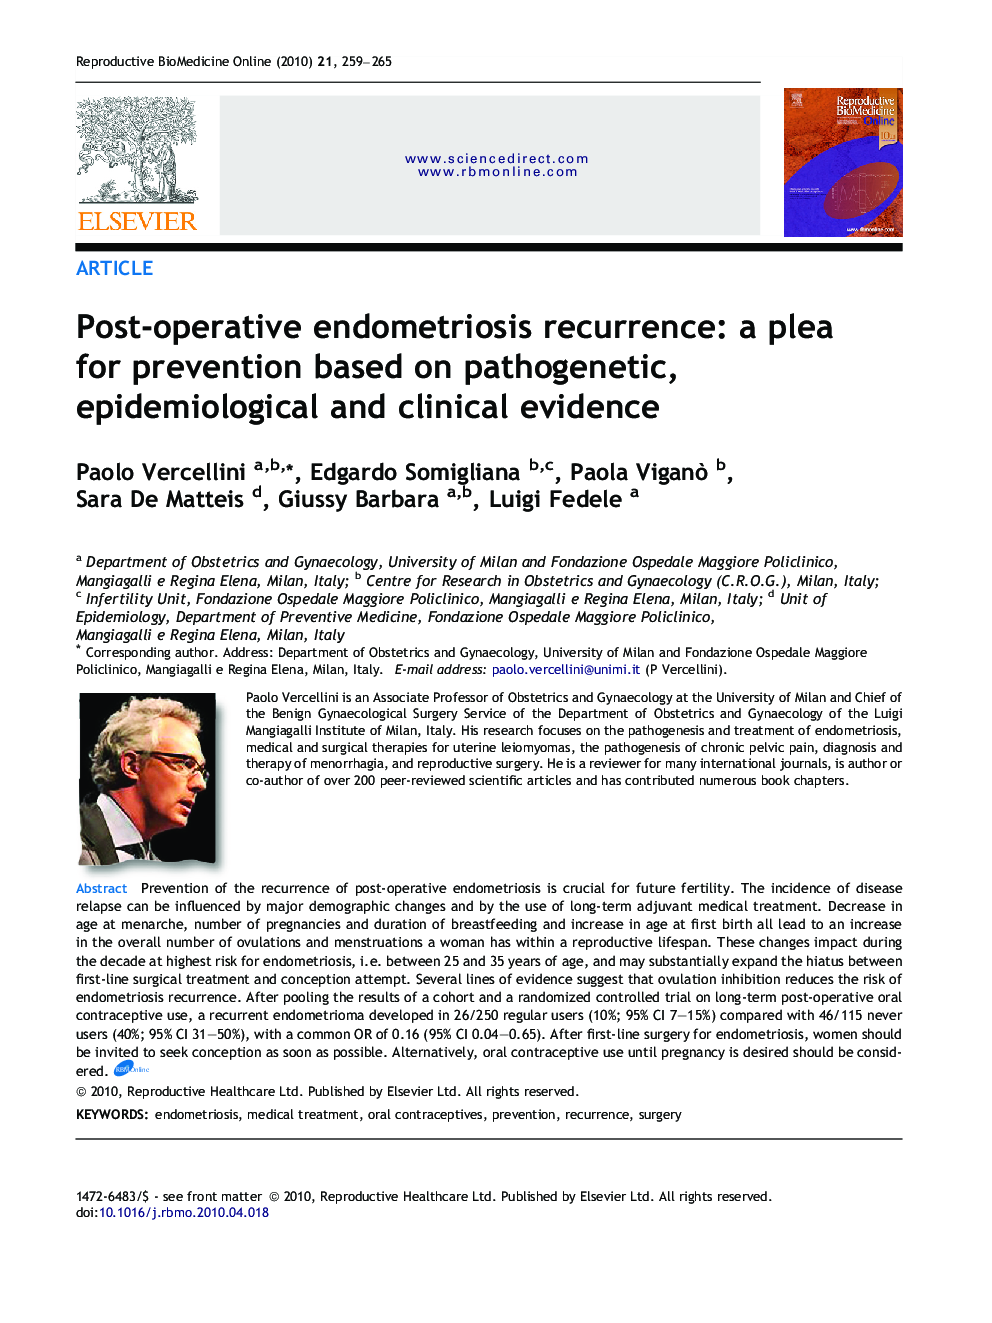 Post-operative endometriosis recurrence: a plea for prevention based on pathogenetic, epidemiological and clinical evidence 